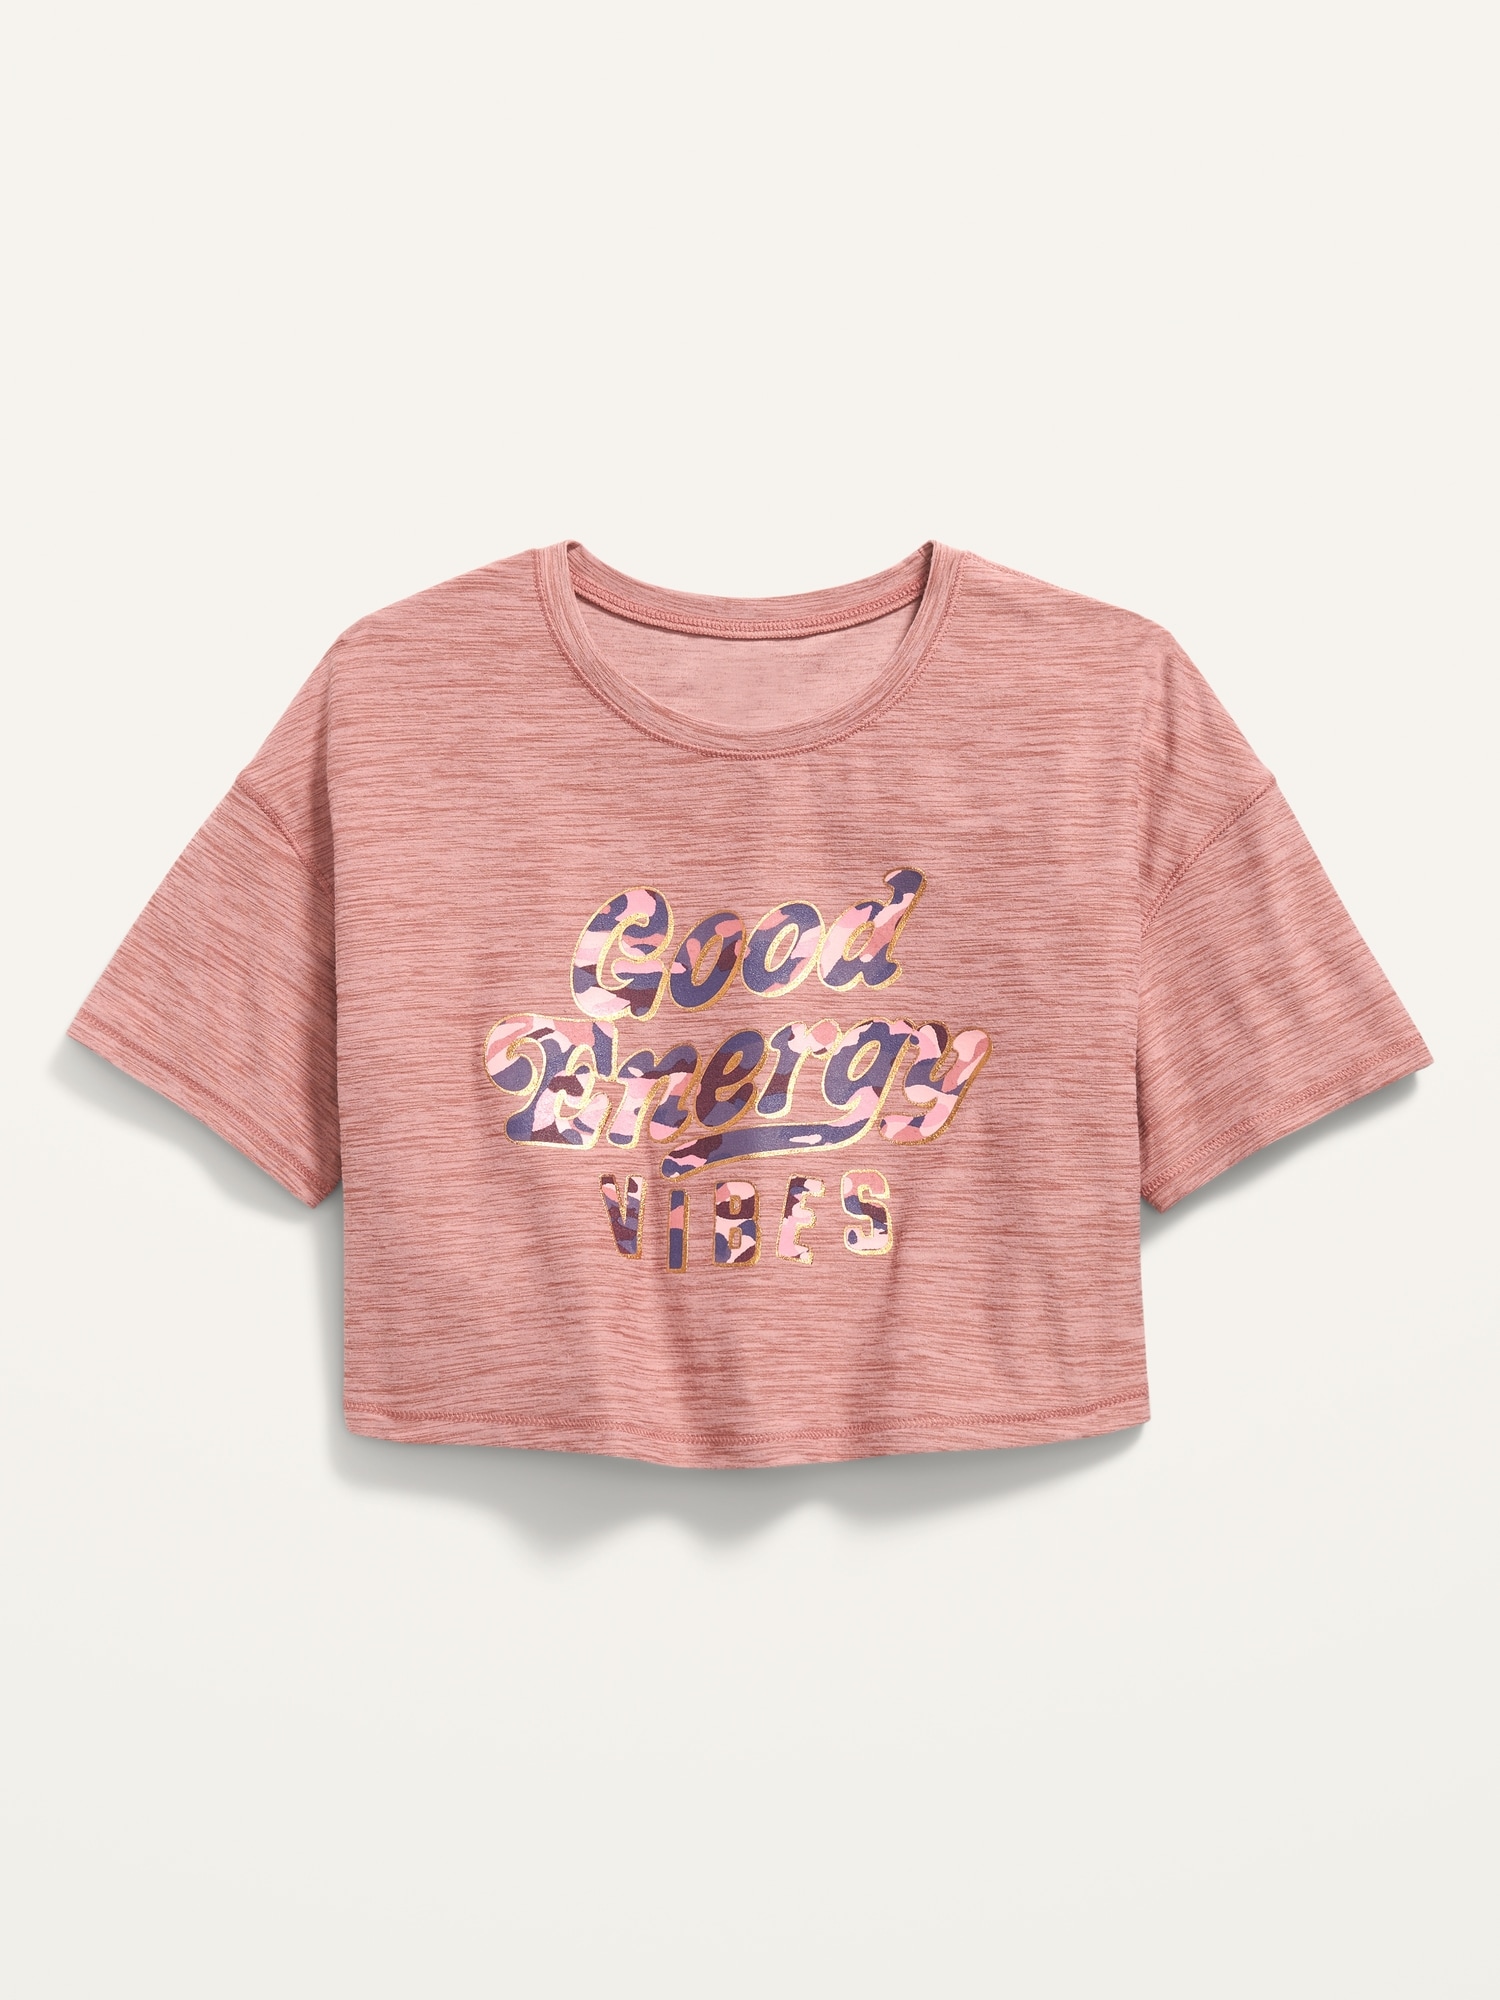 Breathe ON Cropped Graphic T-Shirt for Girls | Old Navy